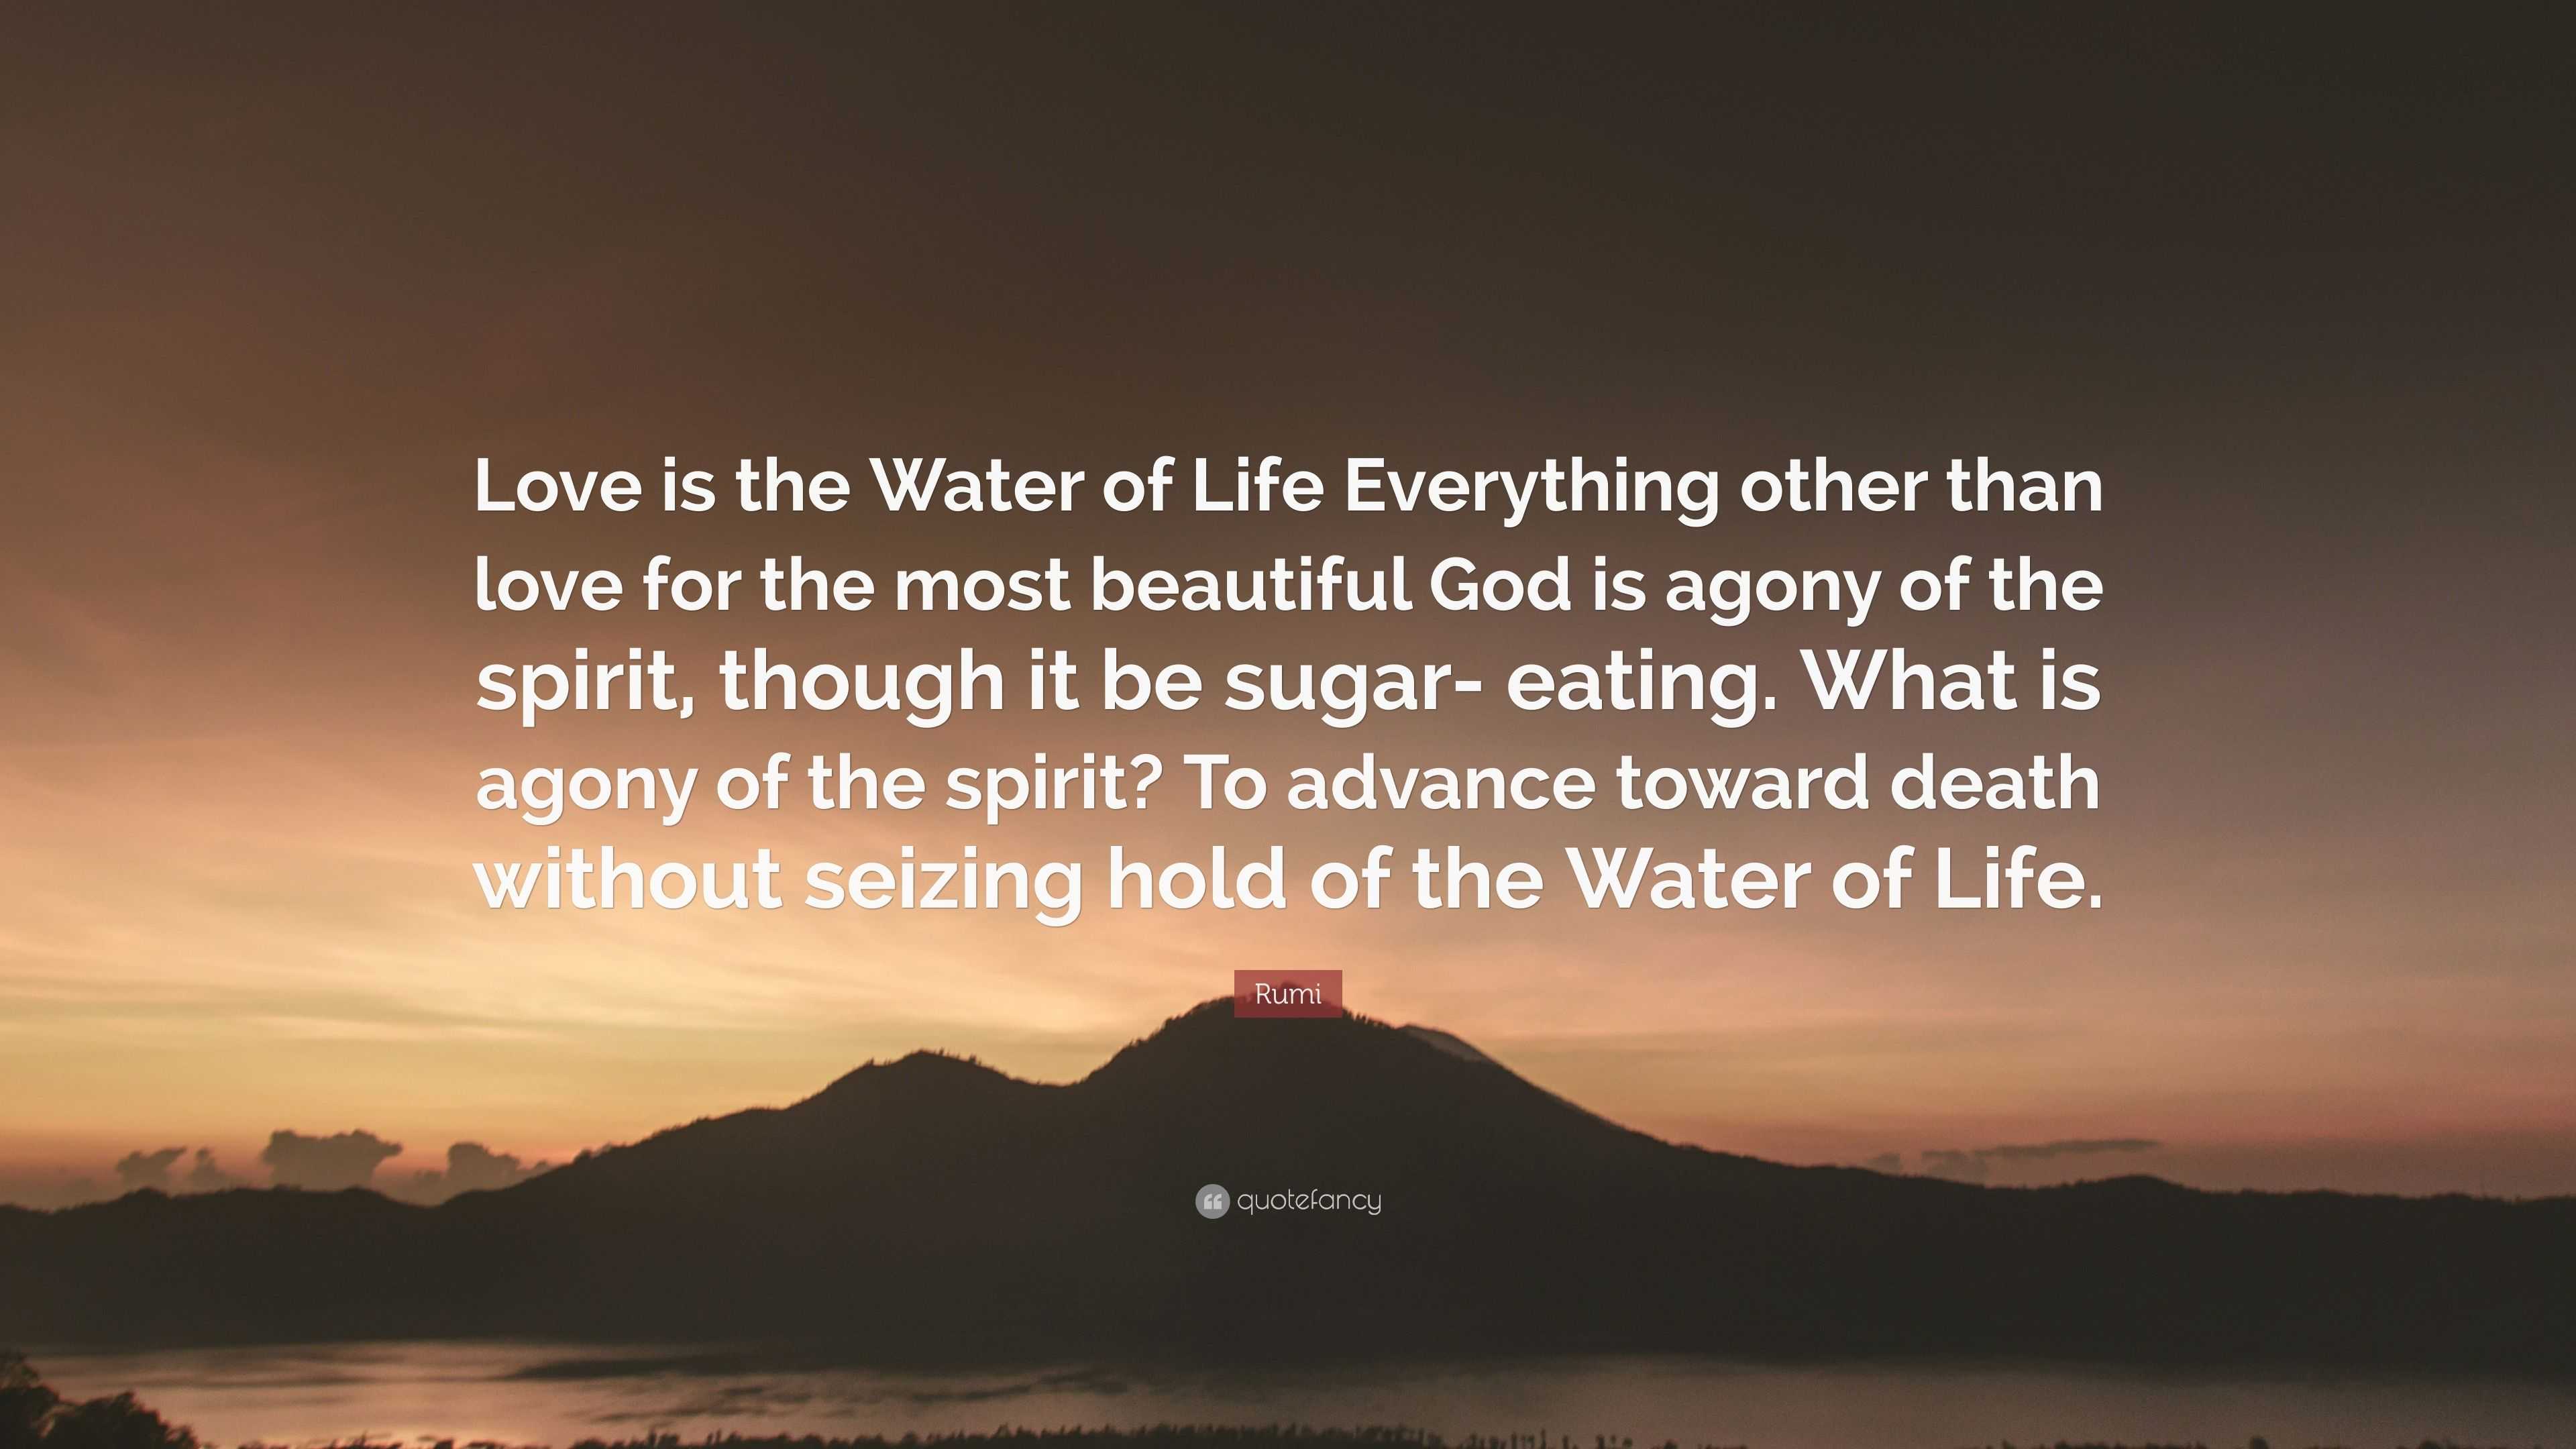 Rumi Quote “Love is the Water of Life Everything other than love for the